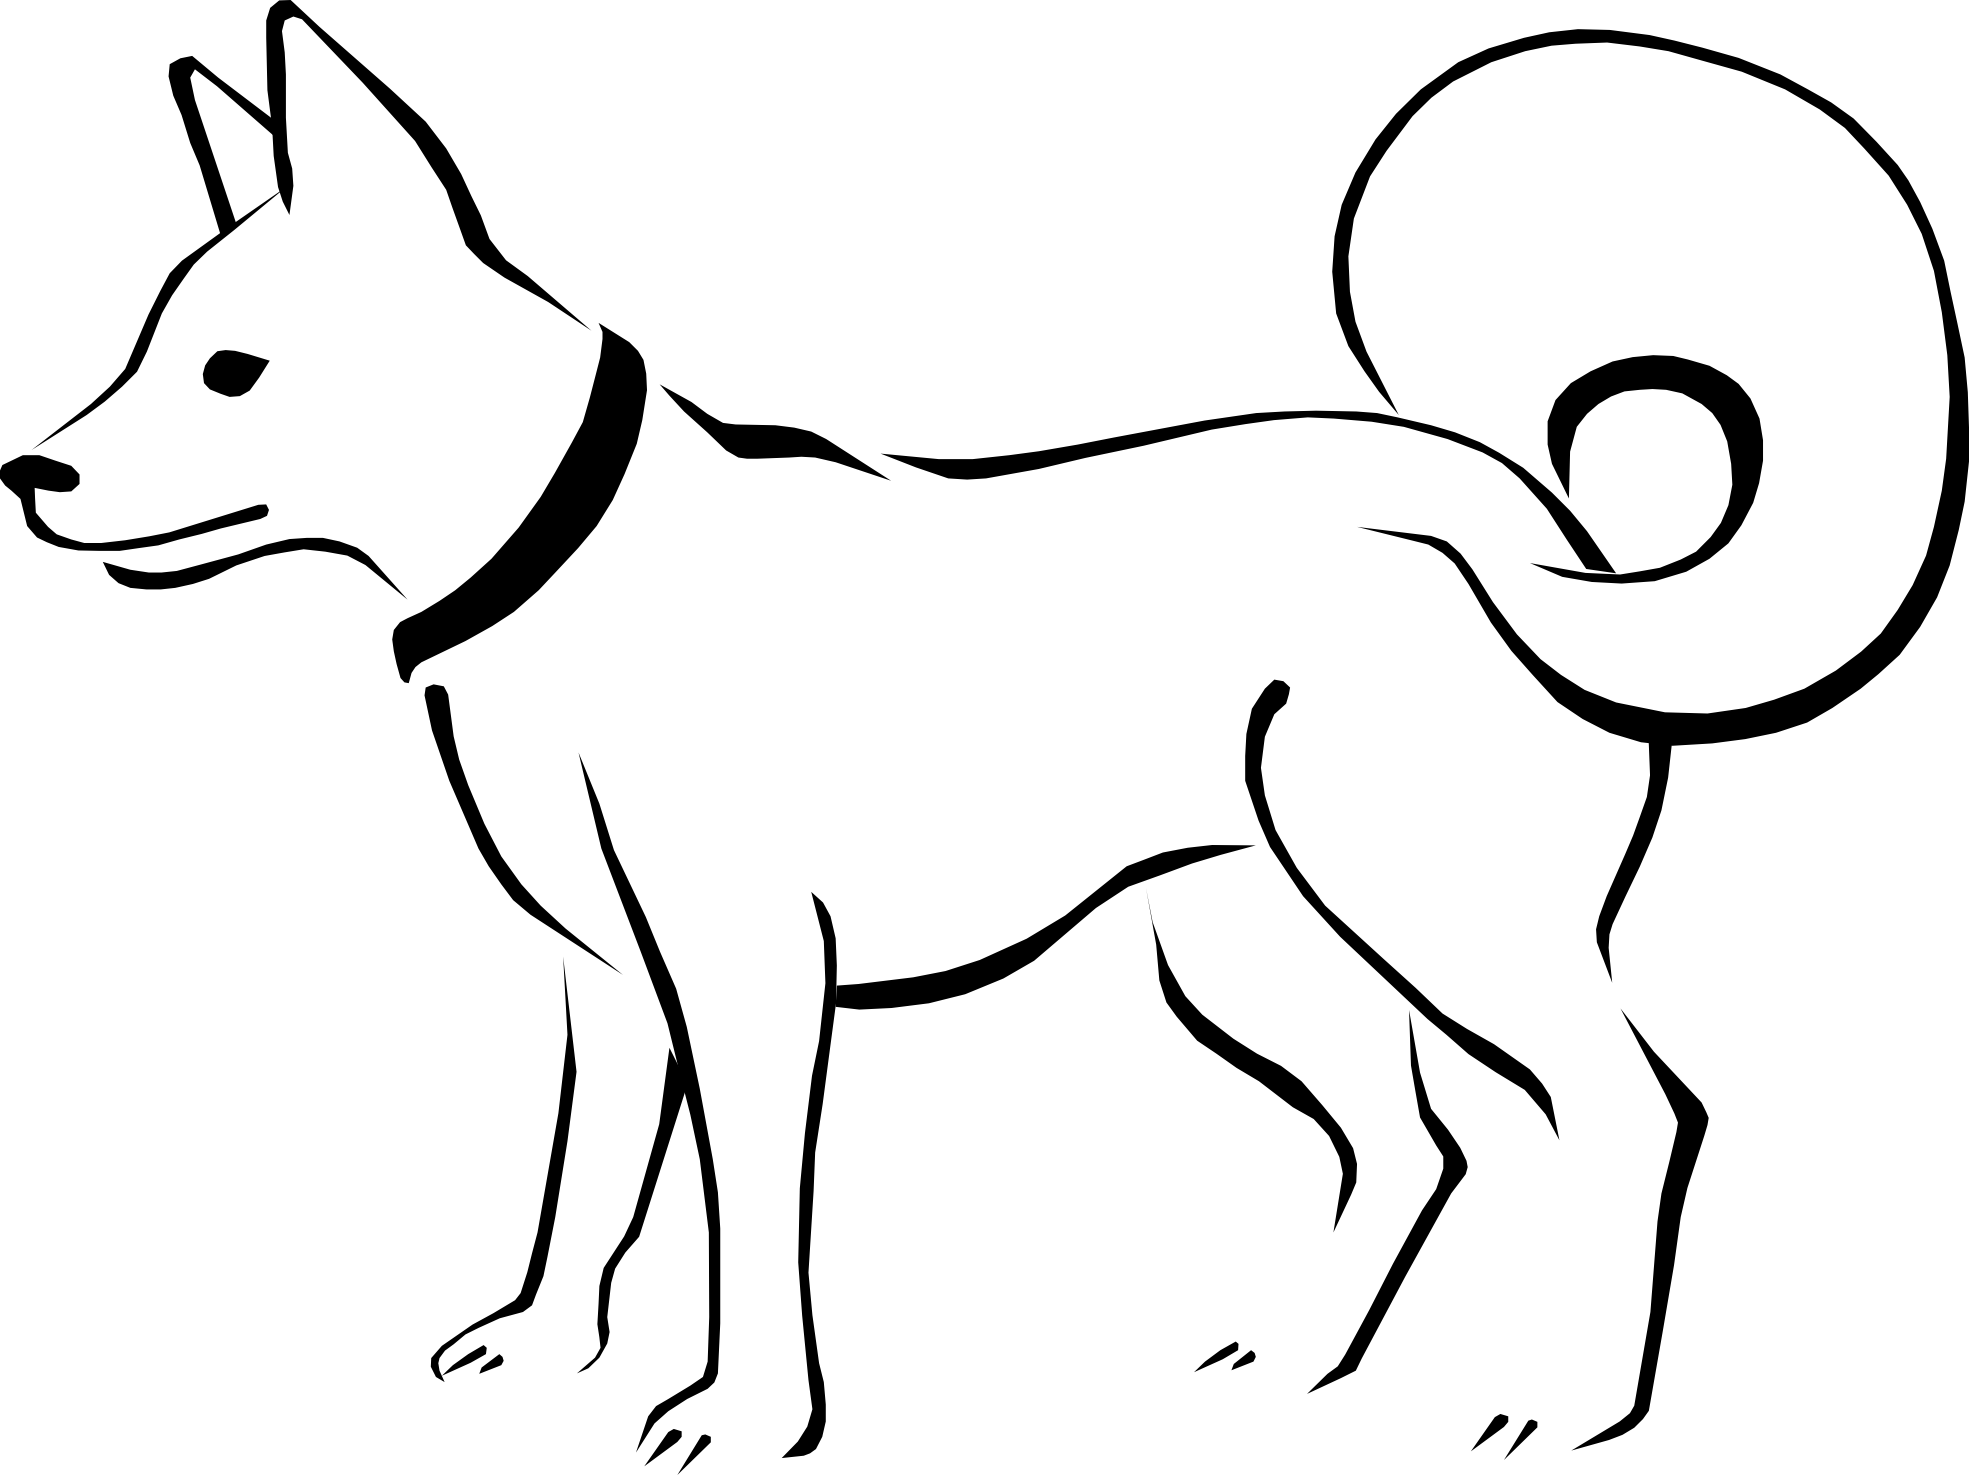 Dog  black and white dog clip art black and white free clipart images 2